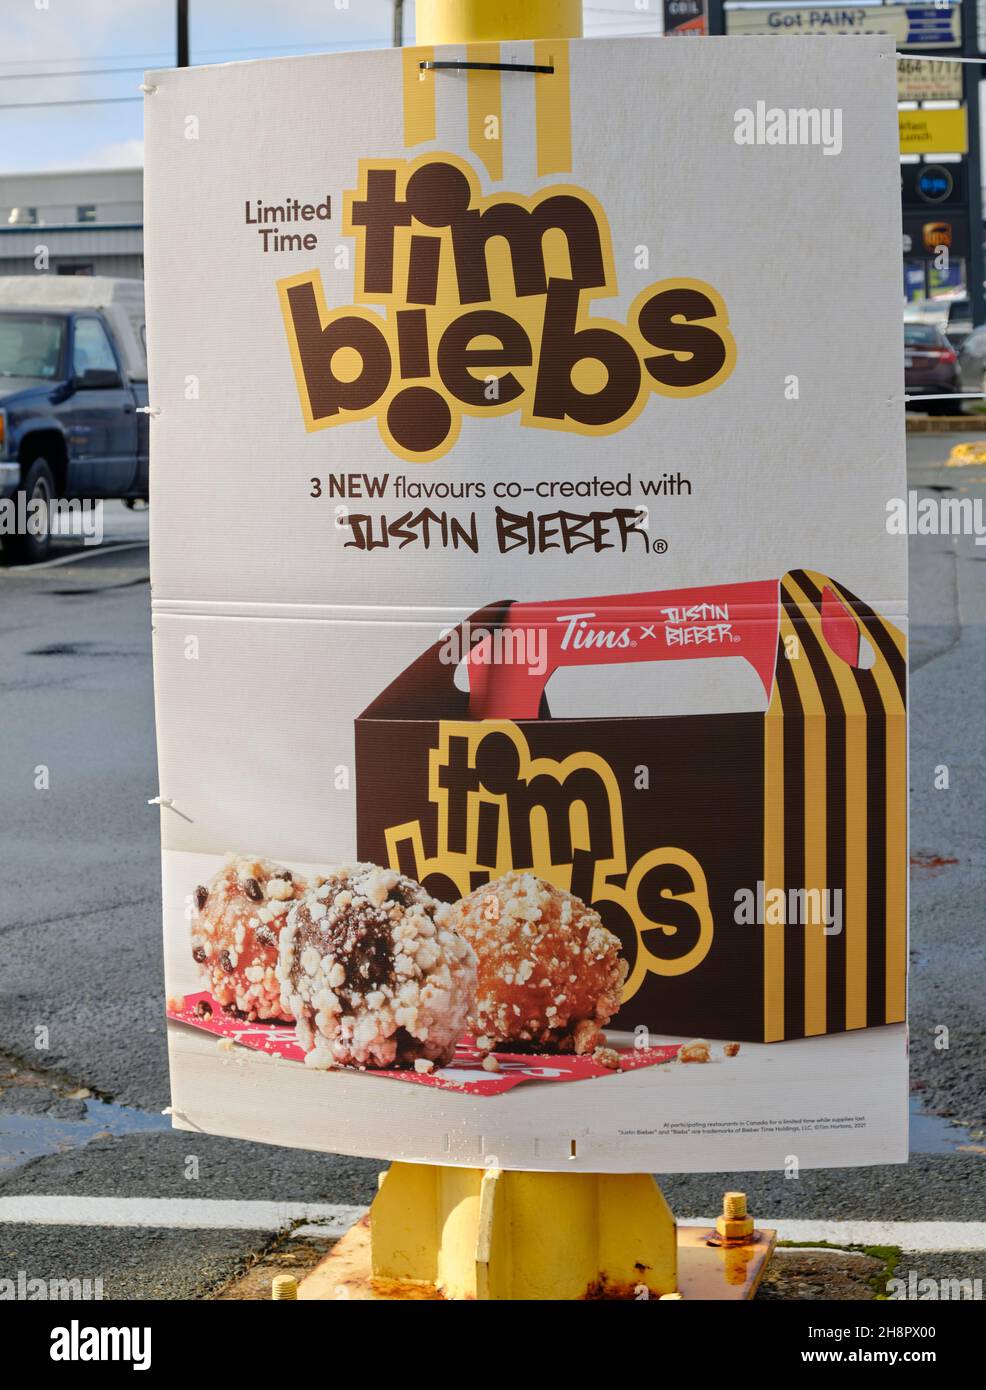 Sign announcing special Tim Biebs donuts created by Justin Bieber at Tim Hortons restaurant. Halifax, Canada. December 1, 2021. Stock Photo